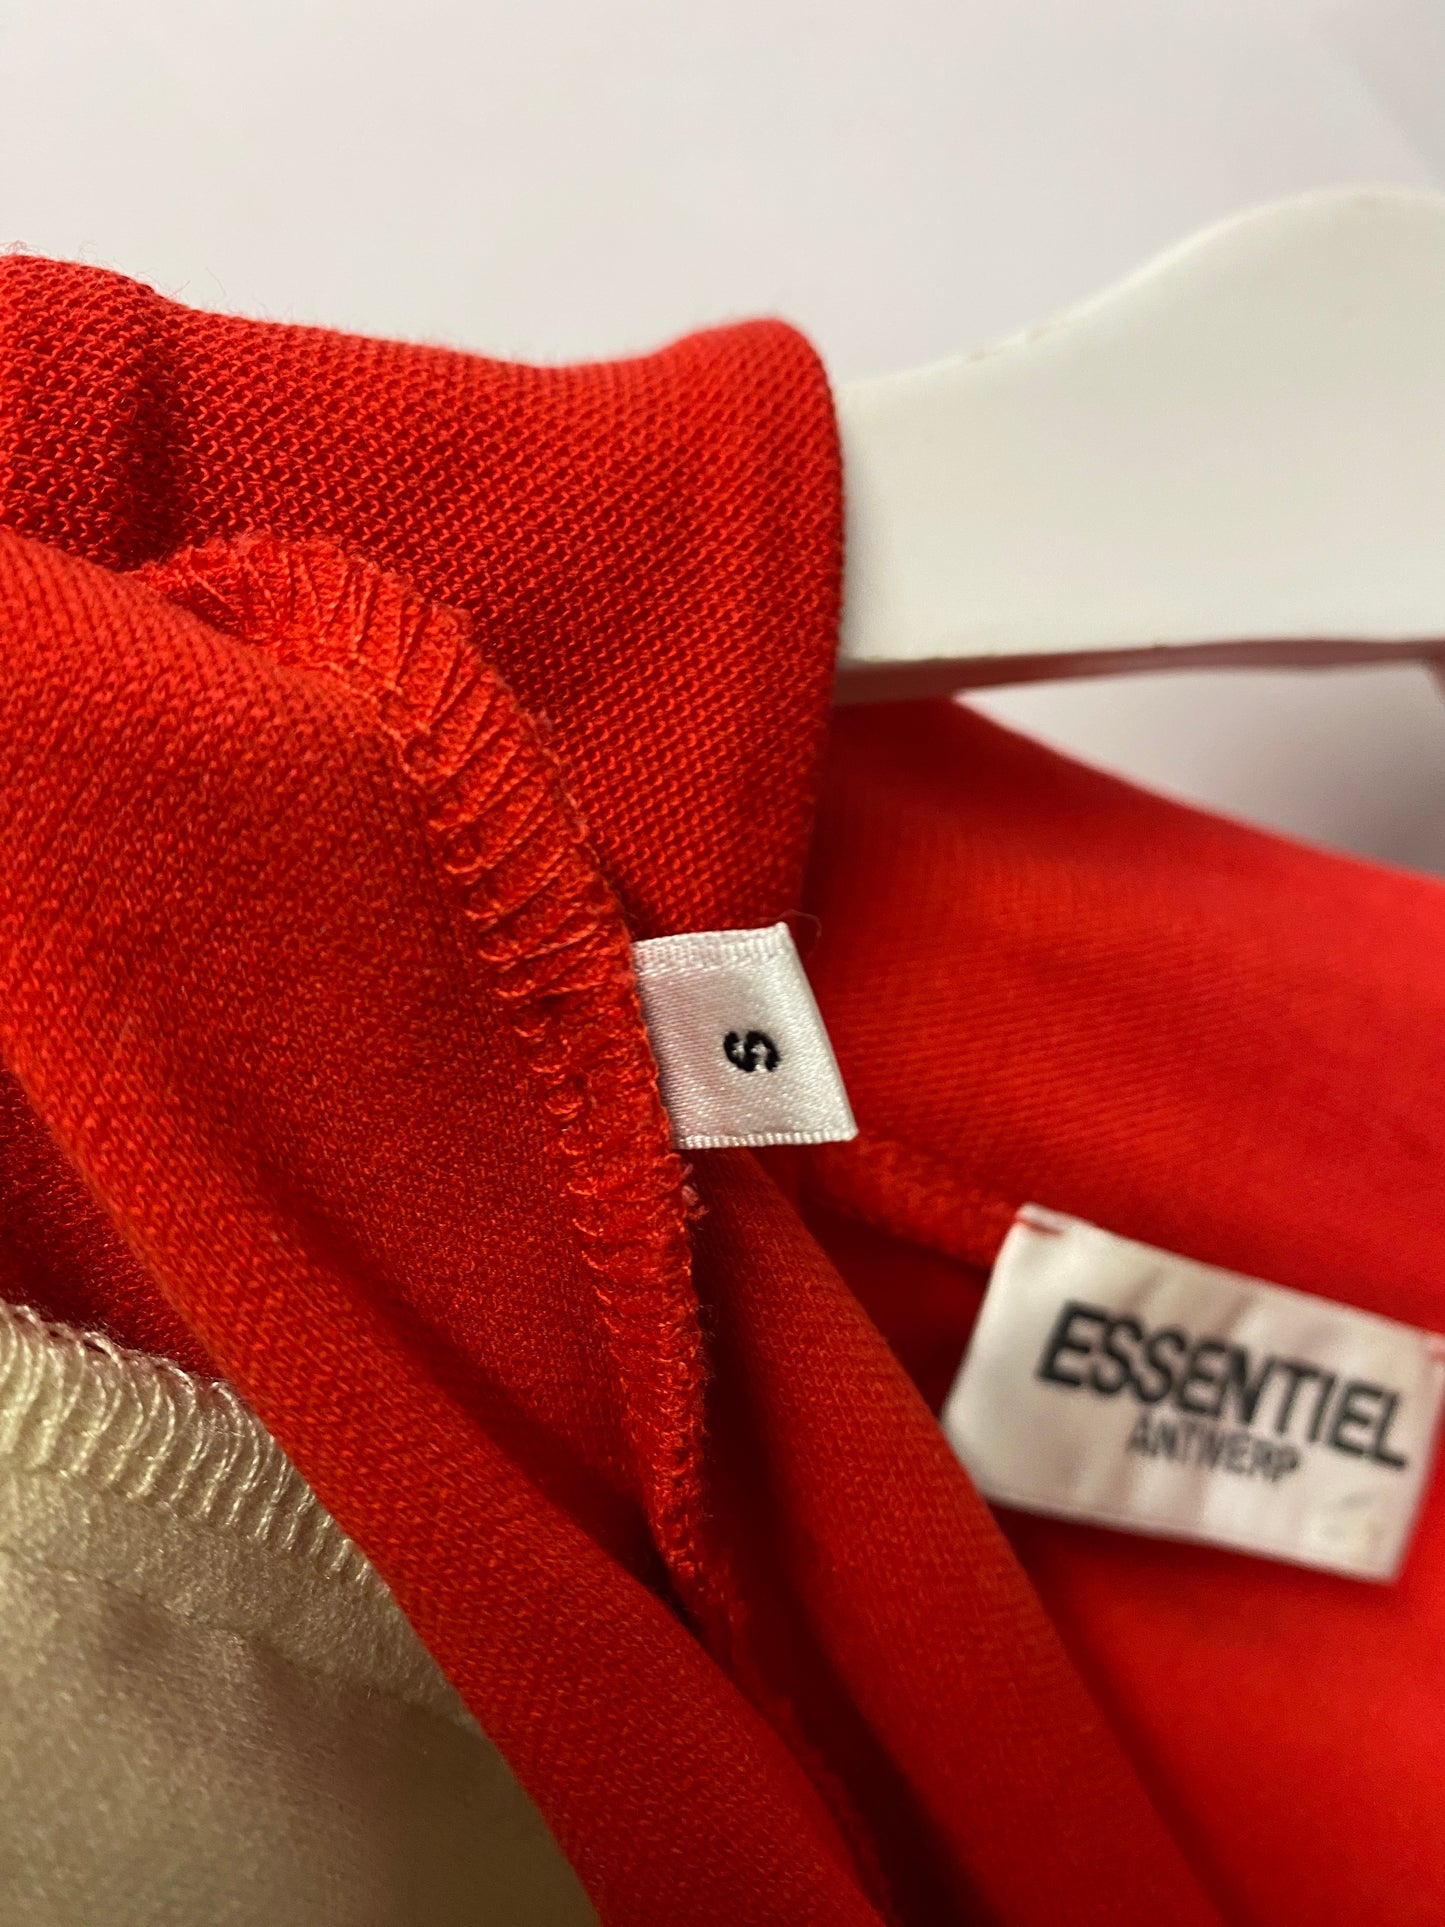 Essentiel Antwerp Red, Cream and Blue Vintage Style Track Jacket Small